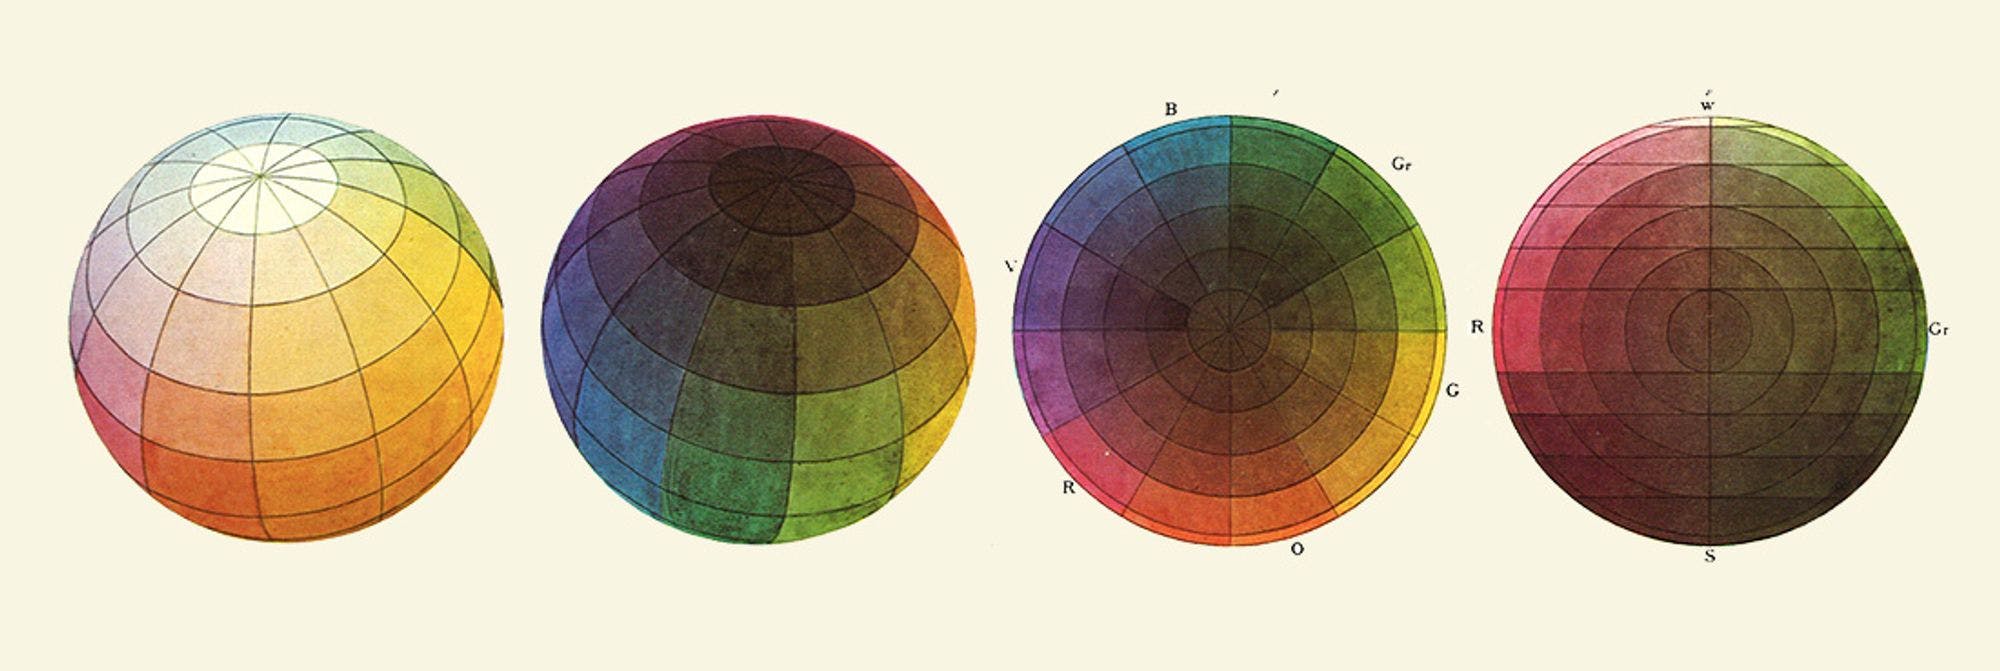 A short history of color theory